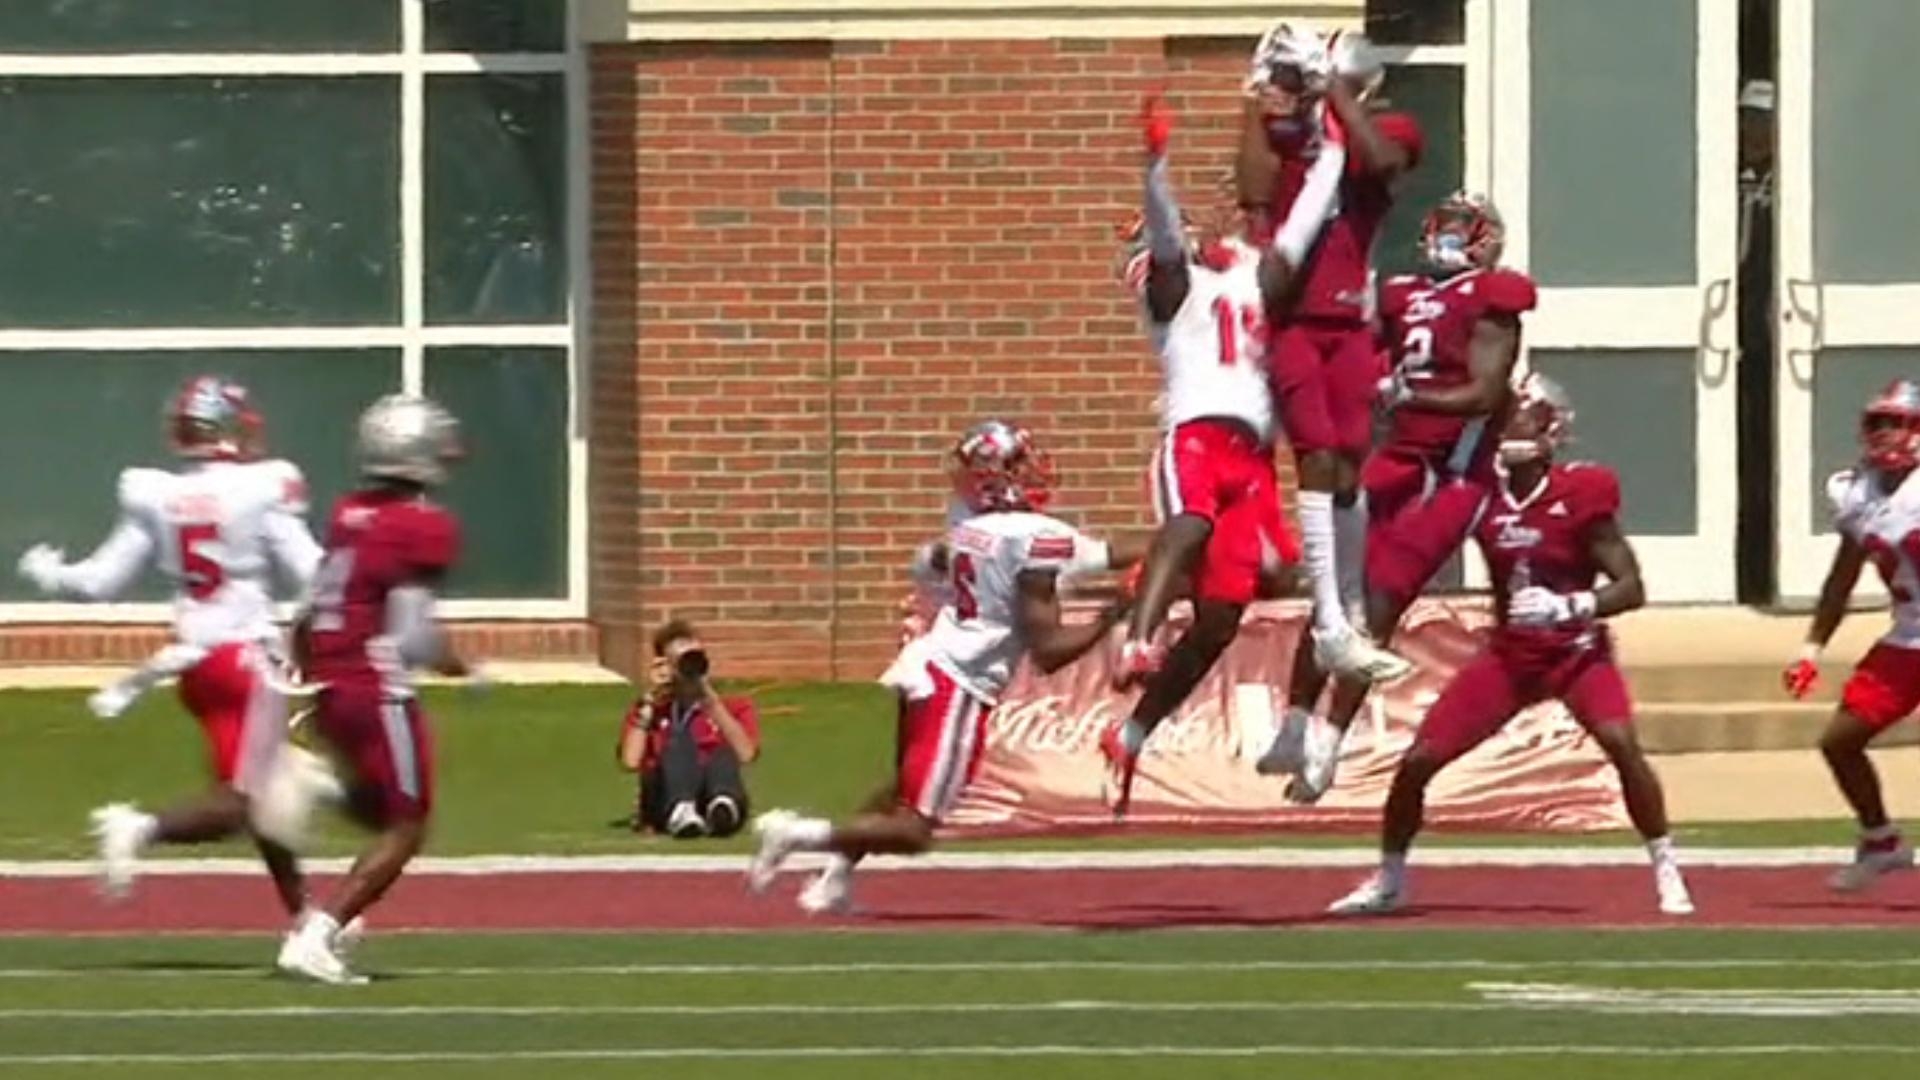 Troy launches 41-yard Hail Mary to take the lead at halftime